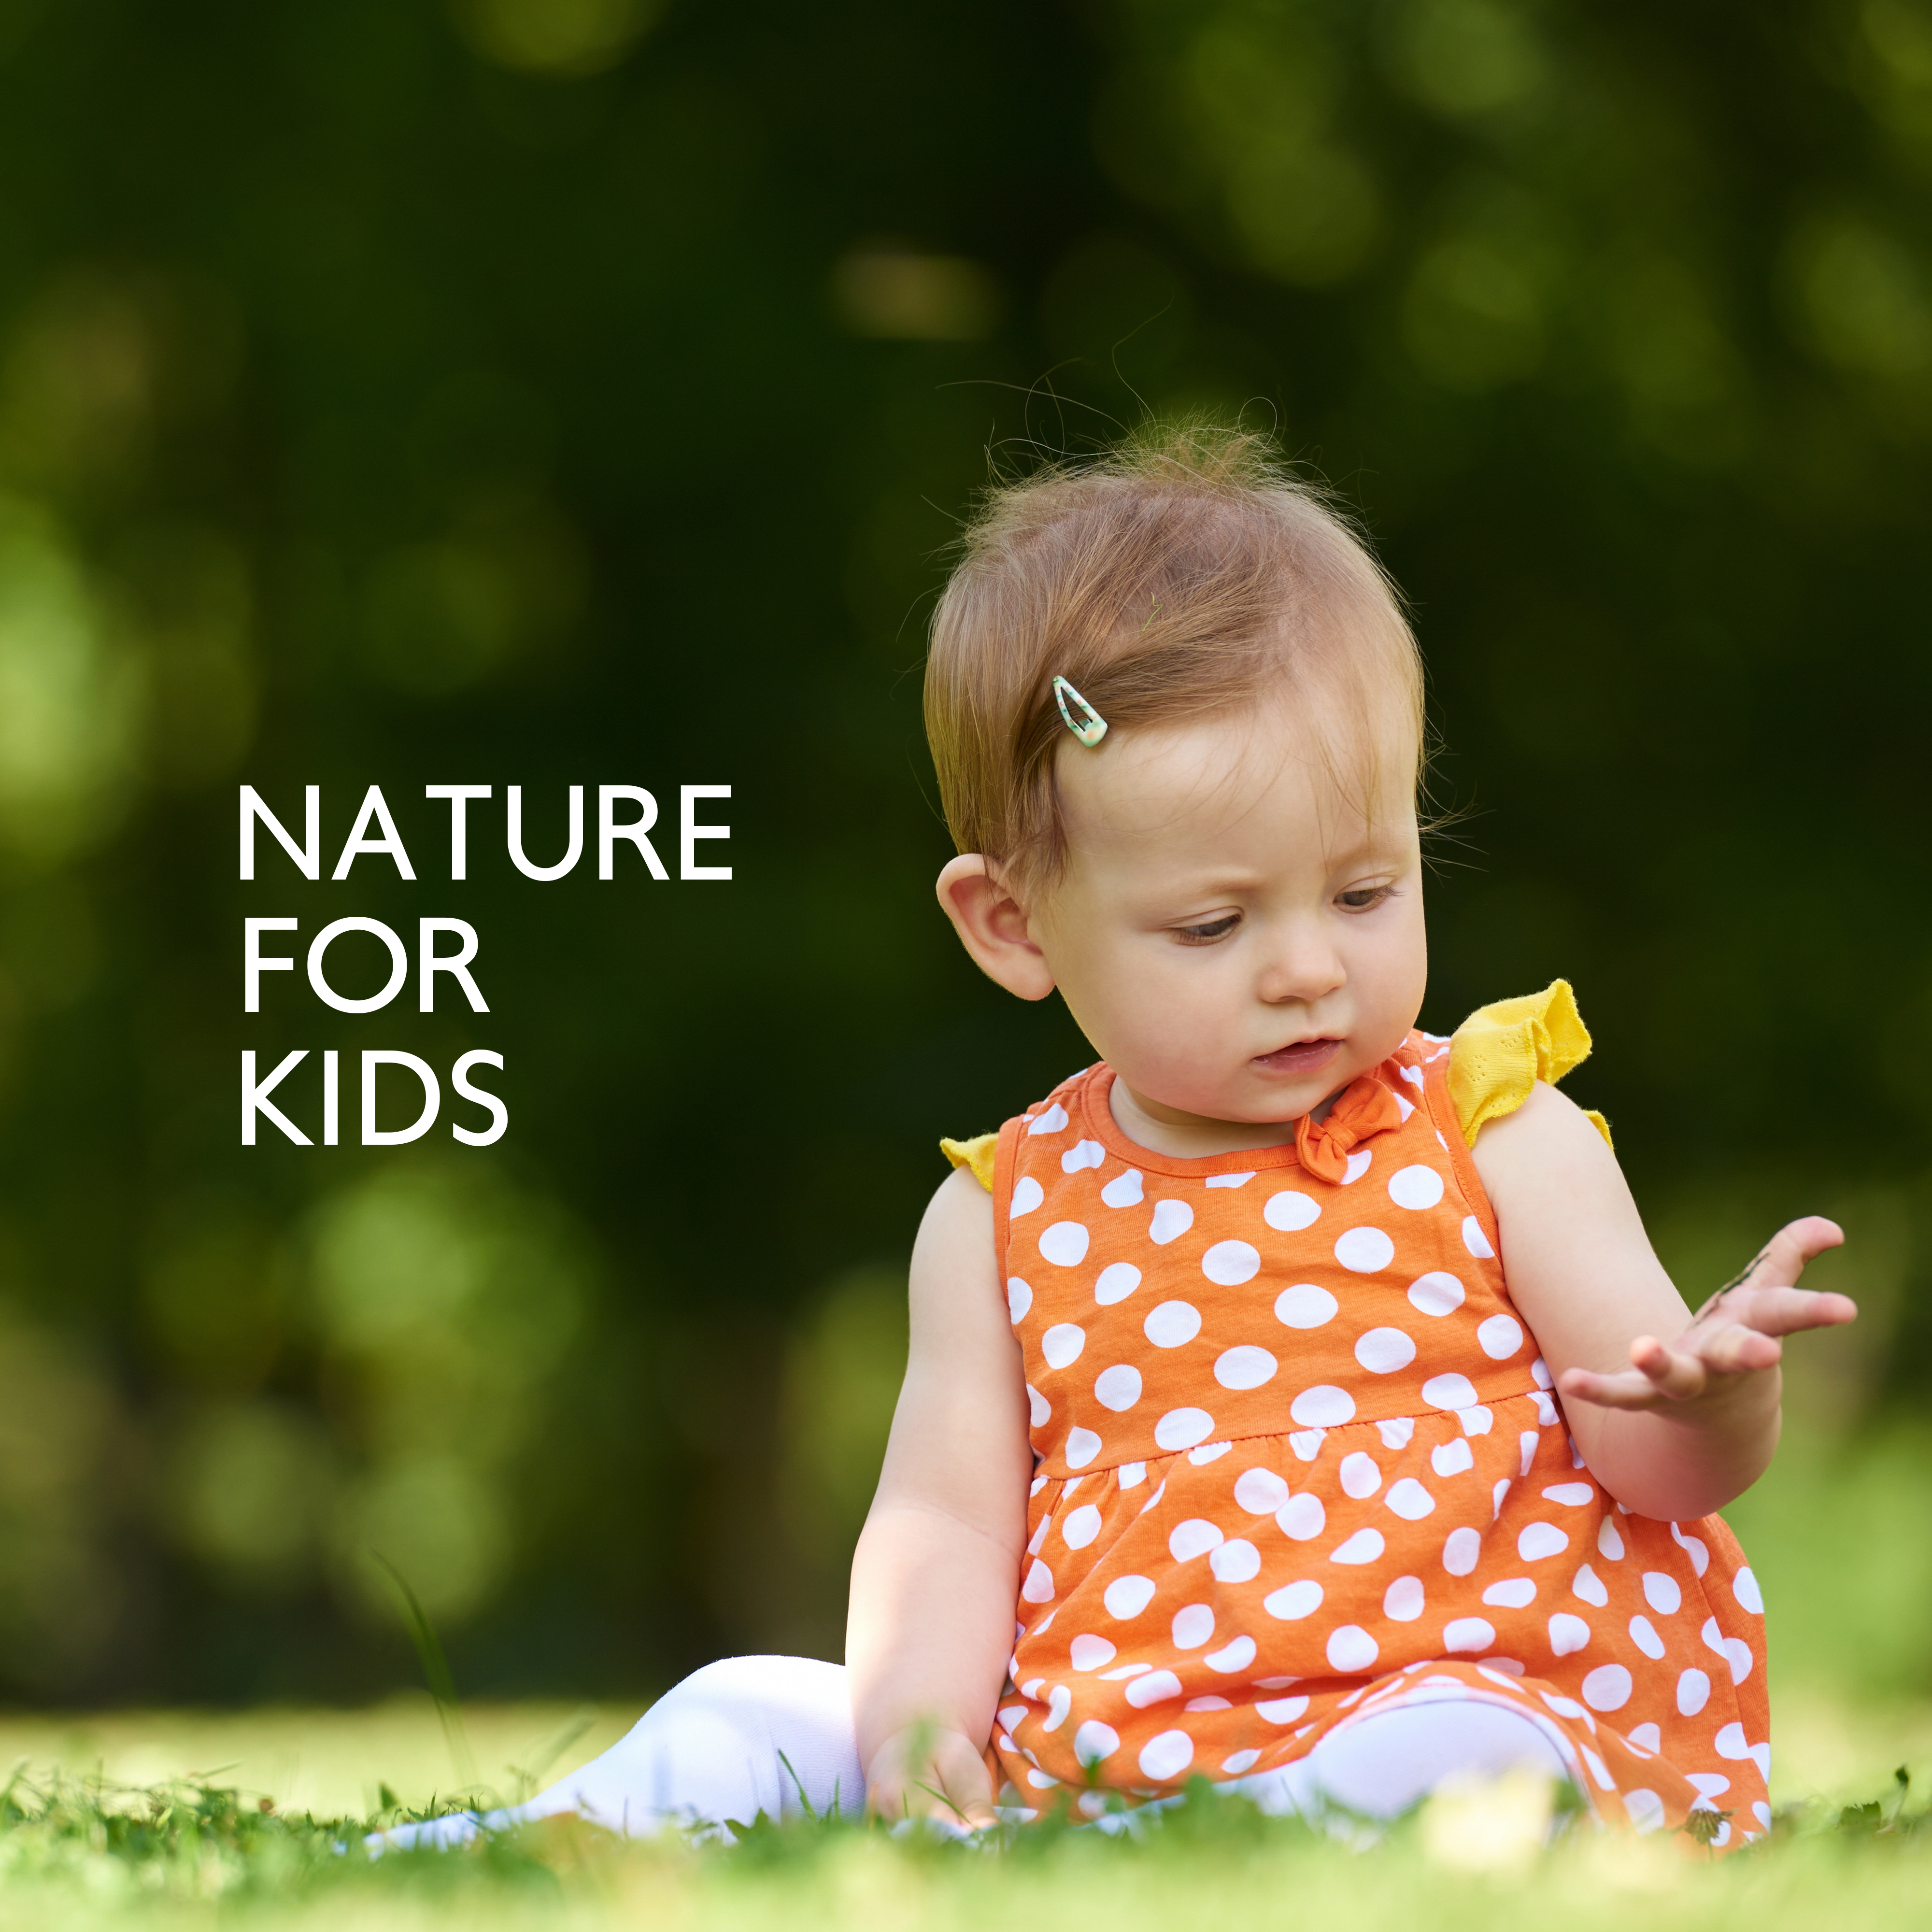 Nature for Kids: Child Friendly Music for Sleep, Relaxation, Rest, Child's Play, Short Nap and as a Lullaby